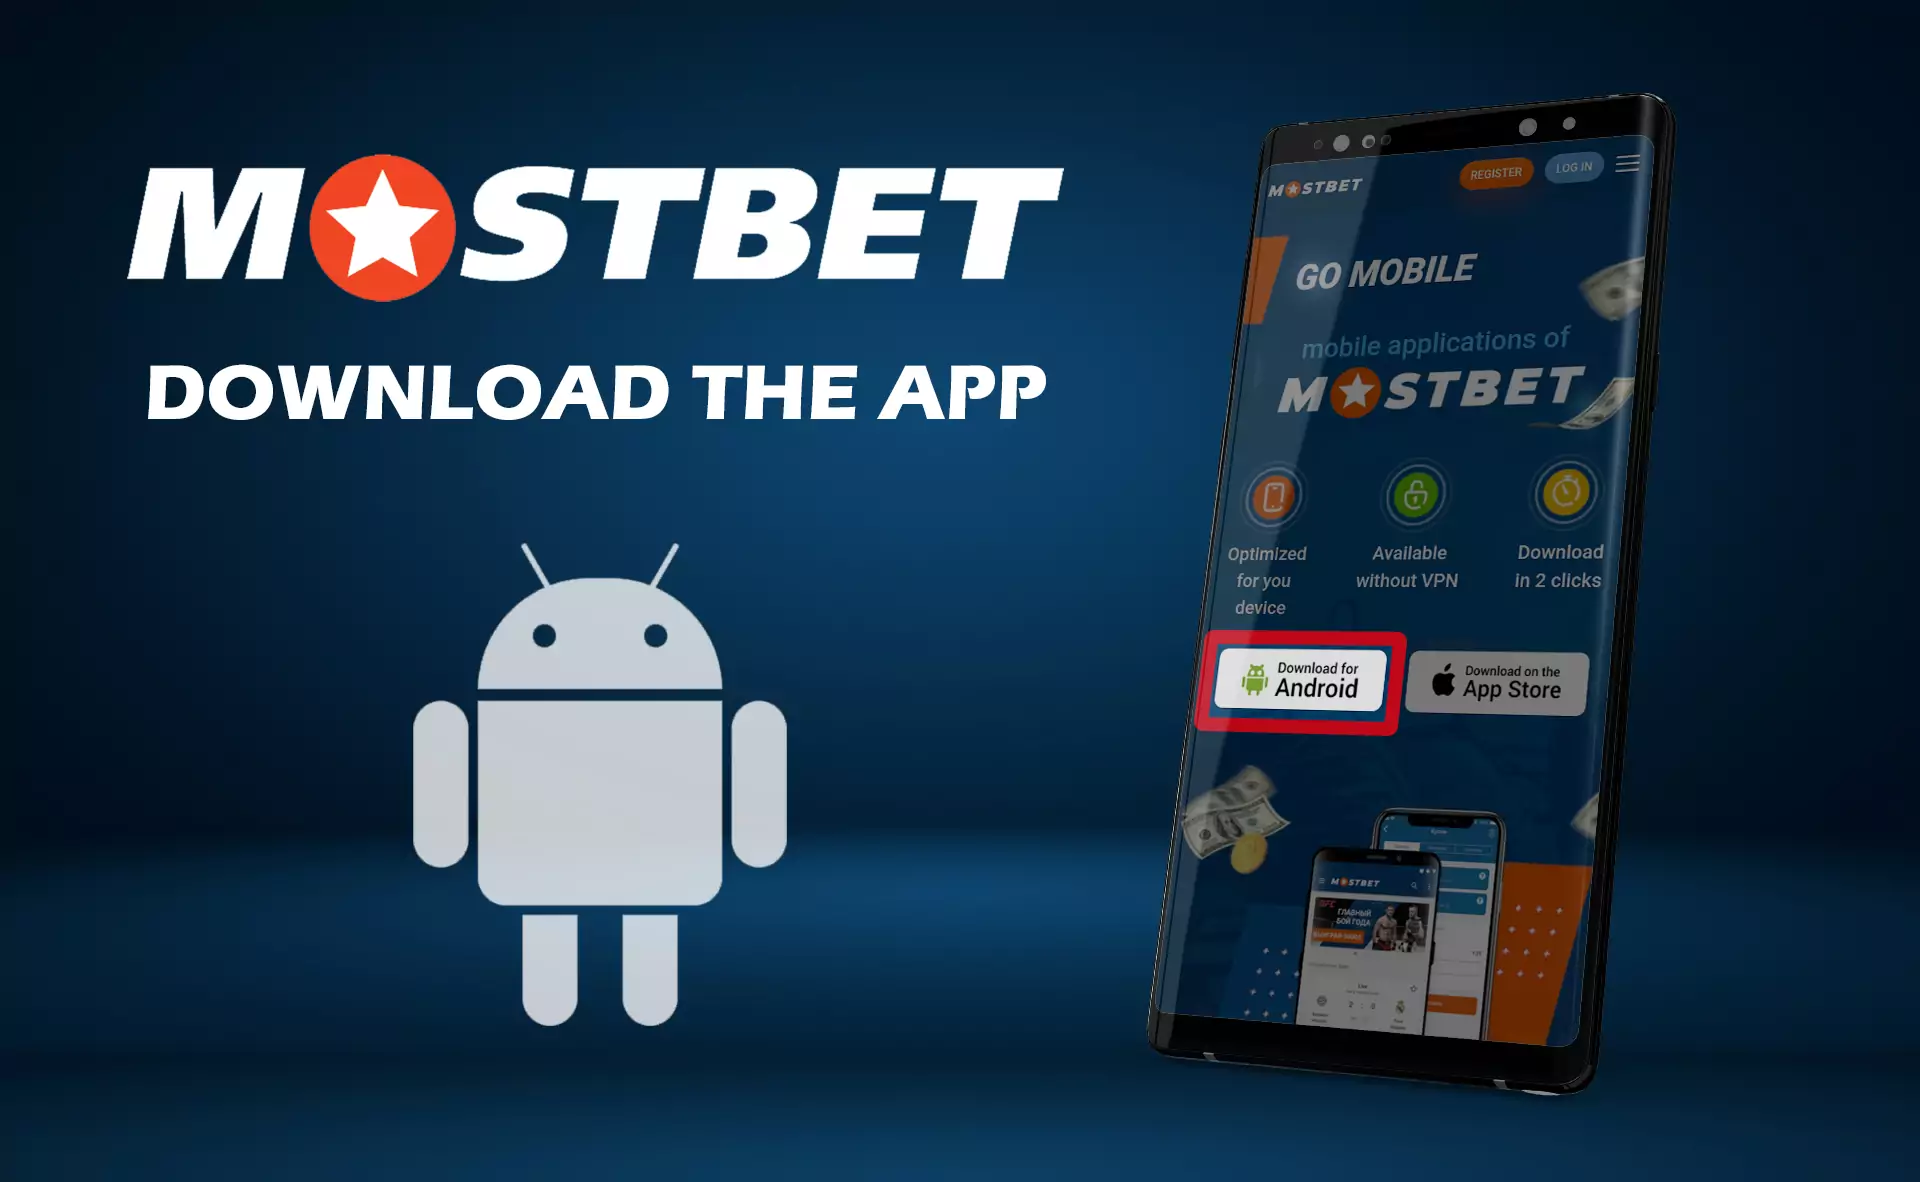 Download the application of Mostbet.